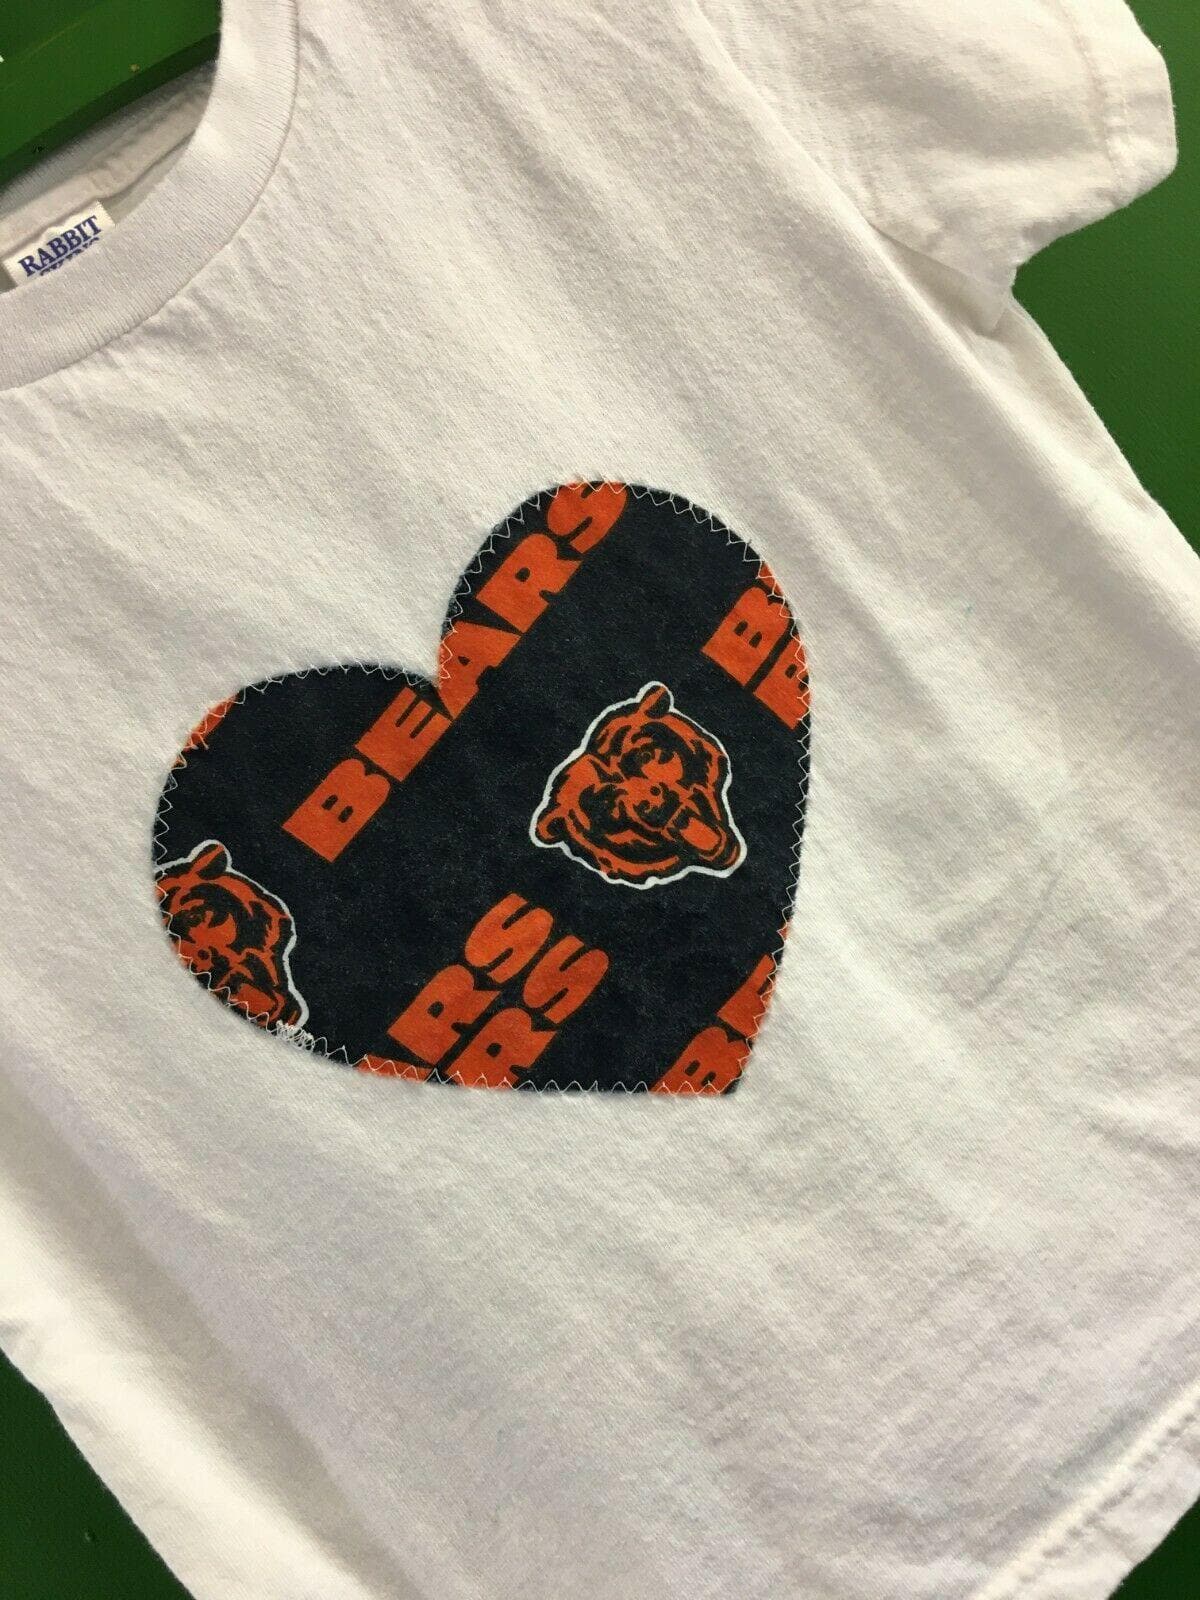 NFL Chicago Bears Heart T-Shirt Youth X-Small 5-6